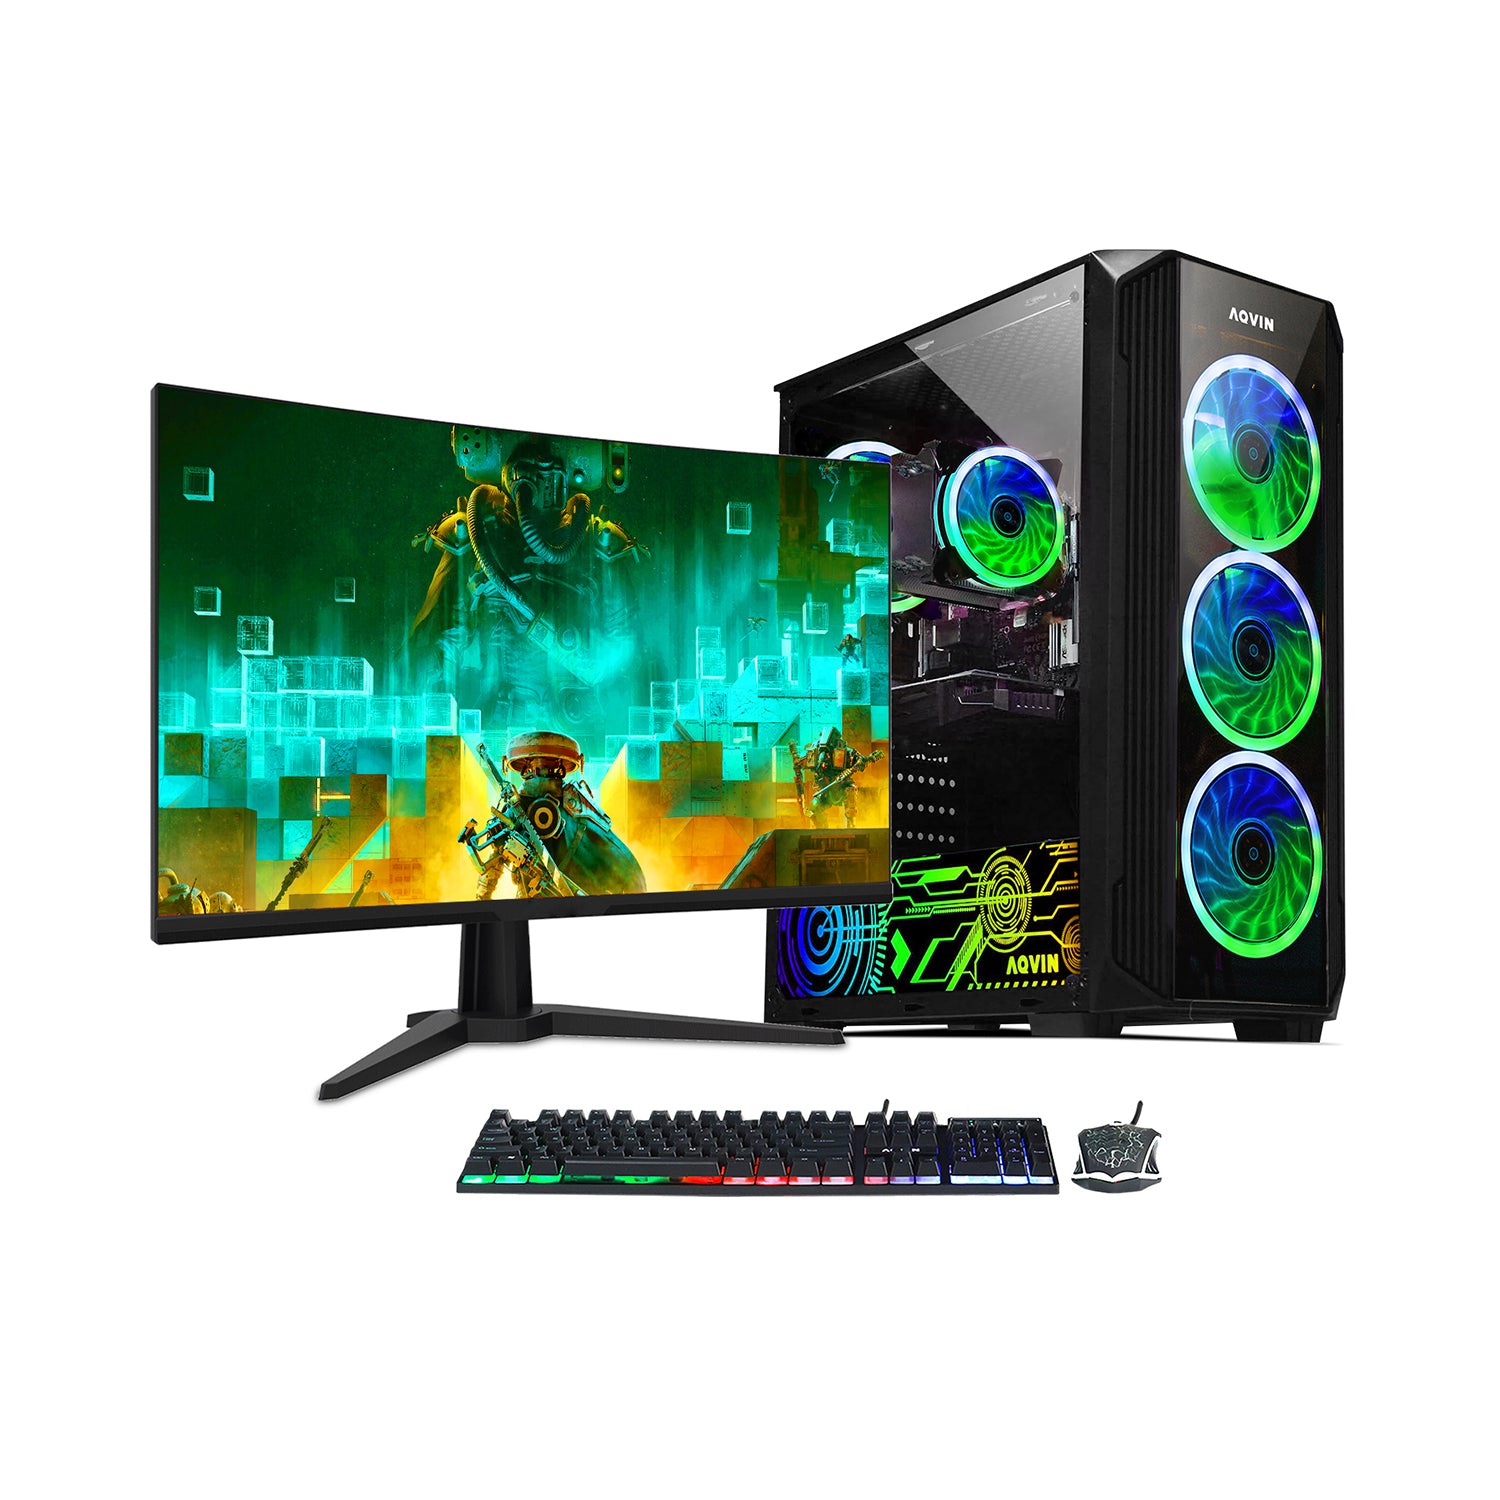 AQVIN Z-Force Gaming Desktop Computer Combo, New 24 inch/ 27 inch Gami